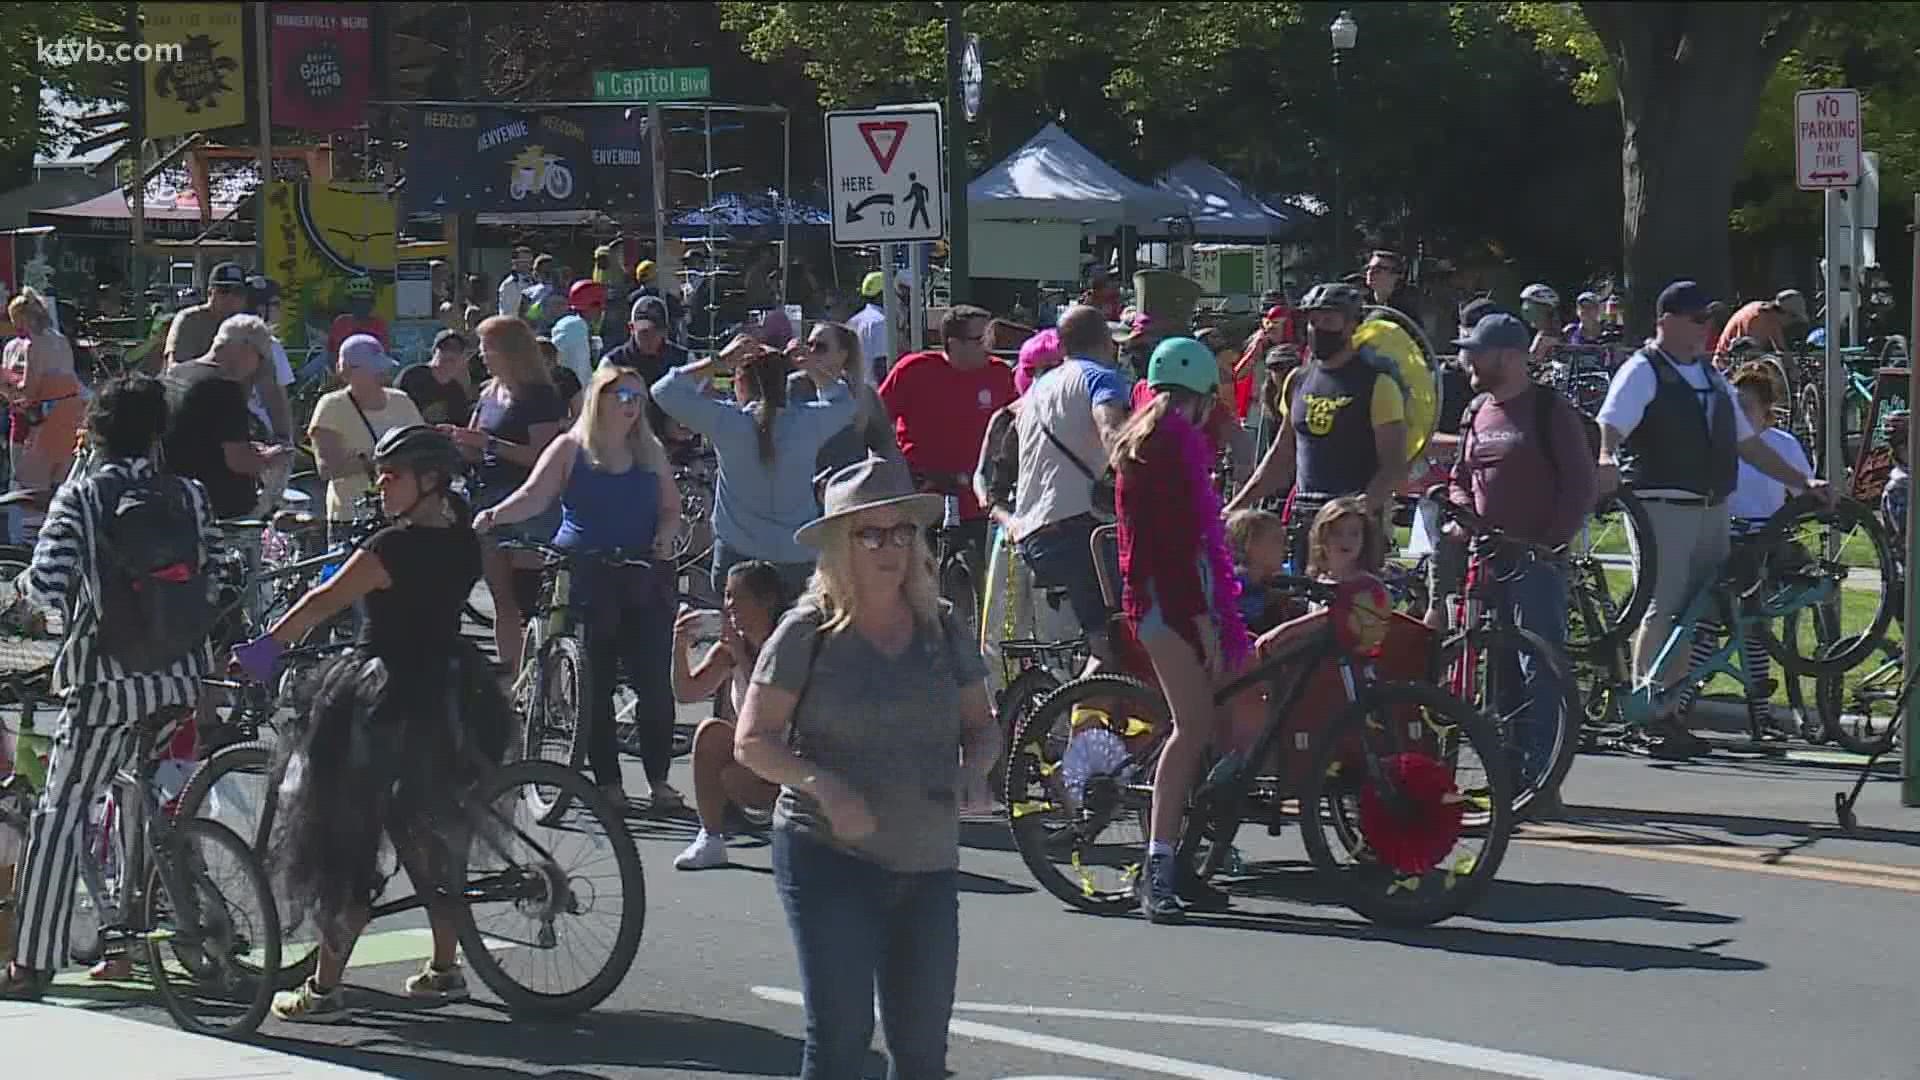 The goal of the festival is to get rid of goatheads, continue to bring people together in a community-building way and celebrate pedal-powered people.